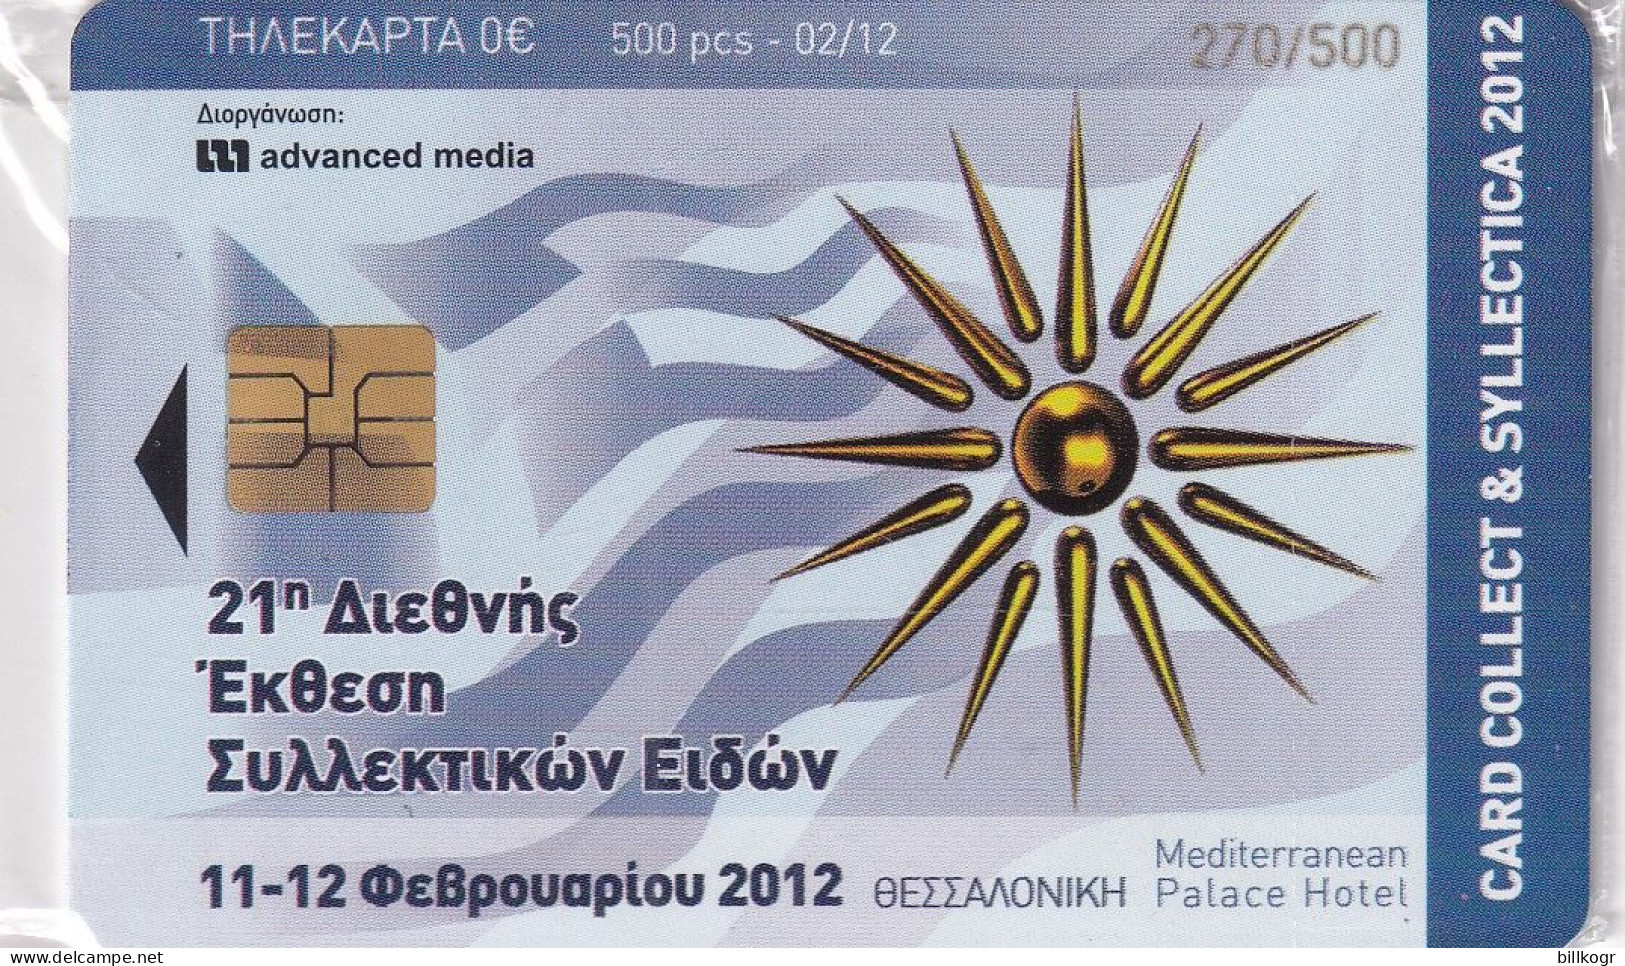 GREECE - Alexander The Great, Card Collect 2012, Exhibition In Thessaloniki, Tirage 500, 02/12, Mint - Griechenland